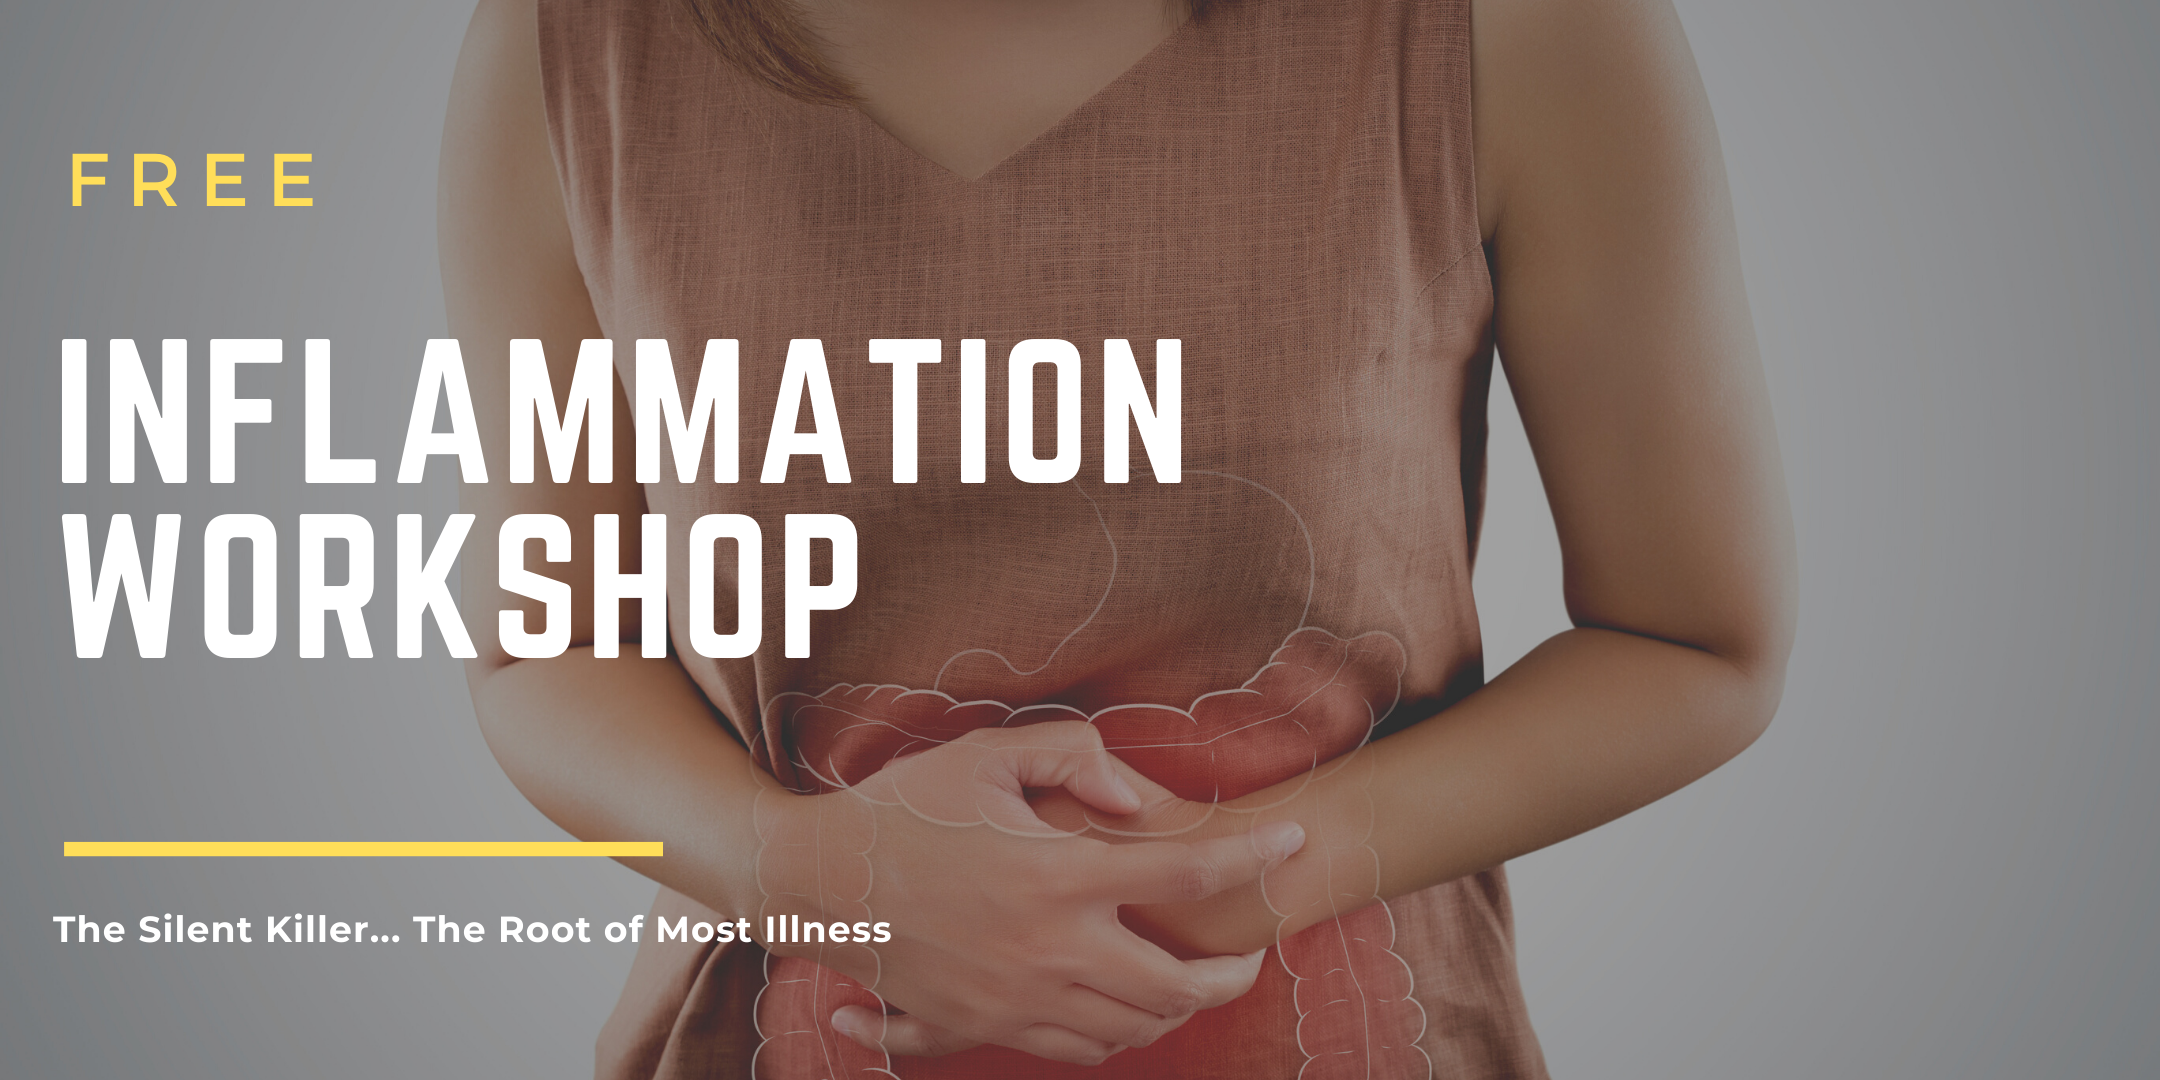 FREE Inflammation Workshop - The Body's Alert Sign